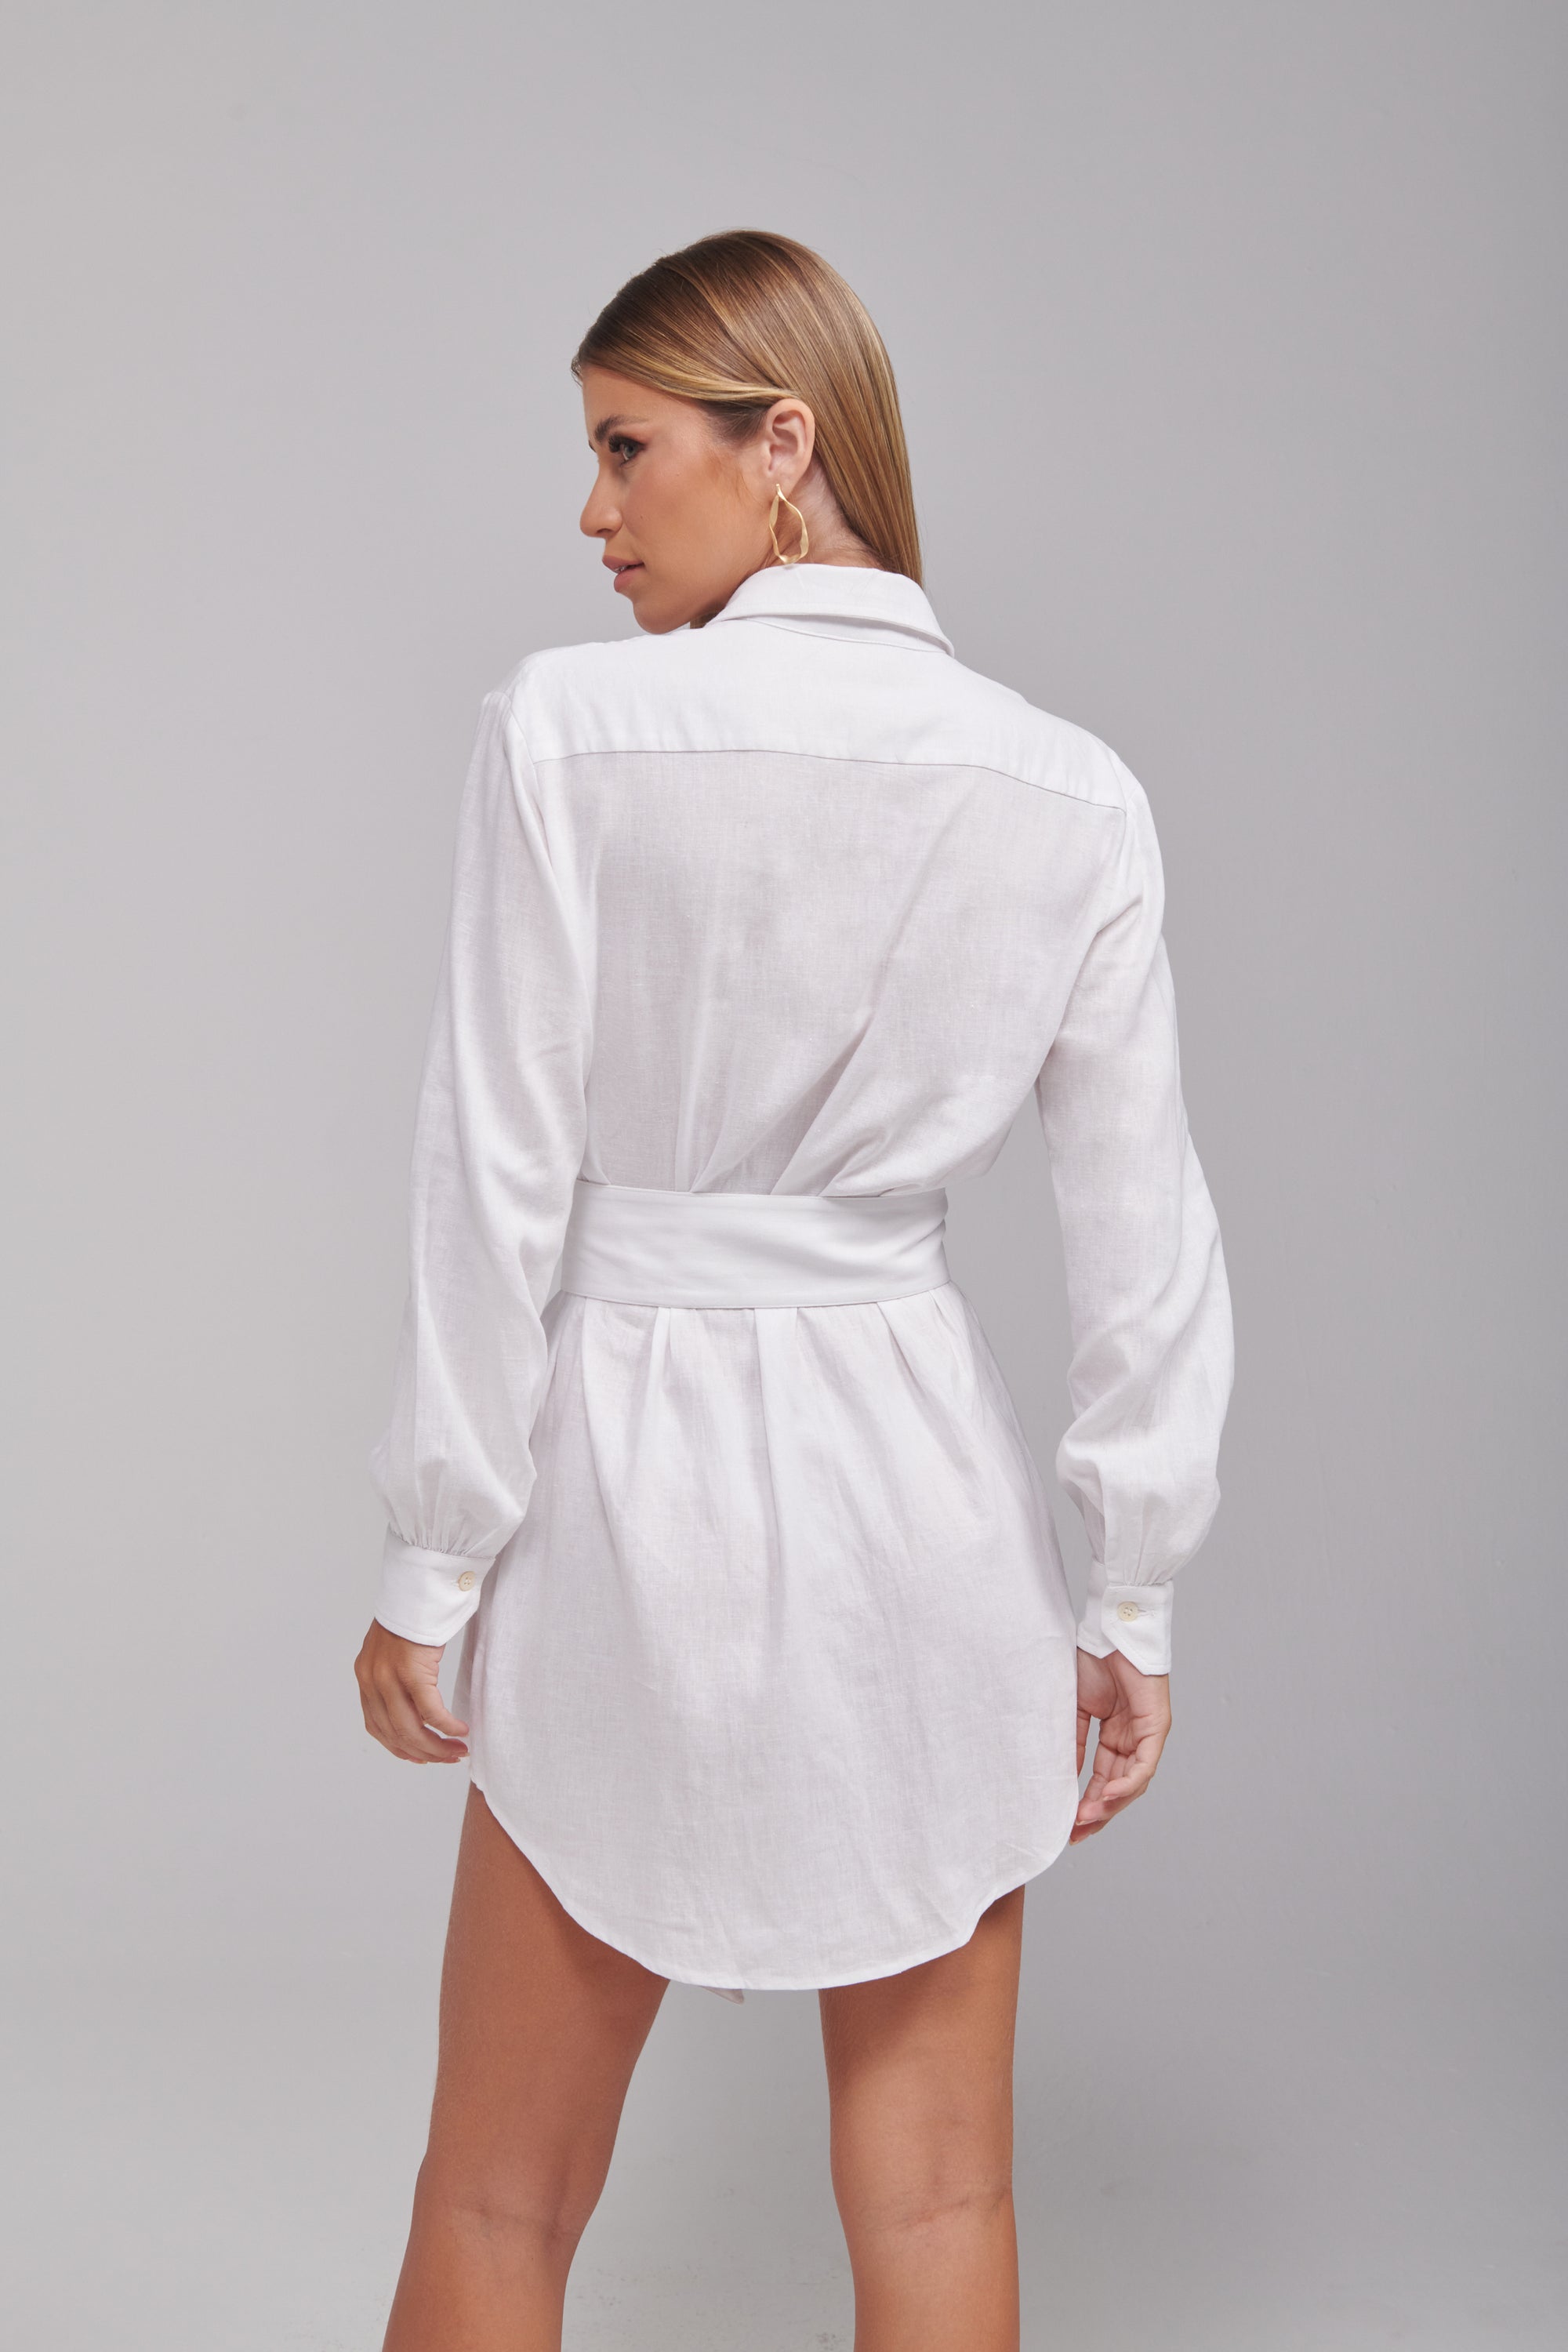 White Linen Shirt Cover Up - Inti - COVER UP - INTI